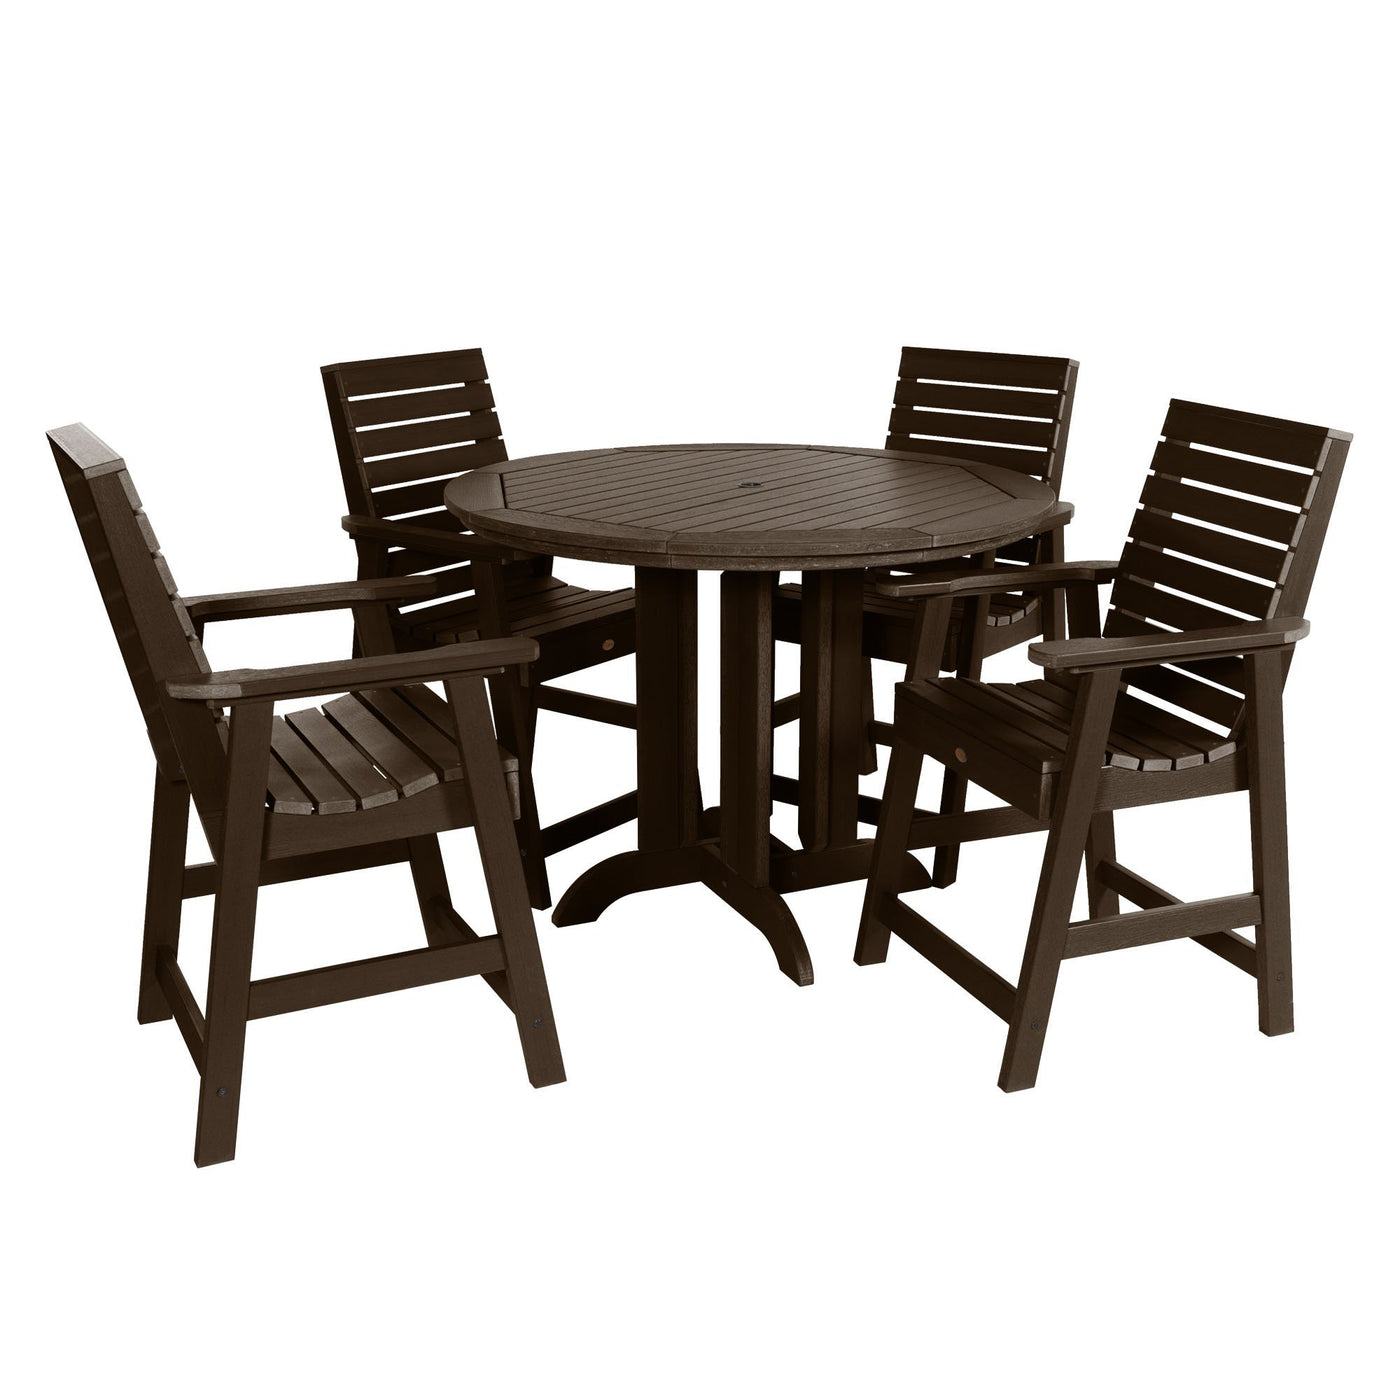 Weatherly 5pc 48in Round Dining Set - Counter Height Dining Highwood USA Weathered Acorn 